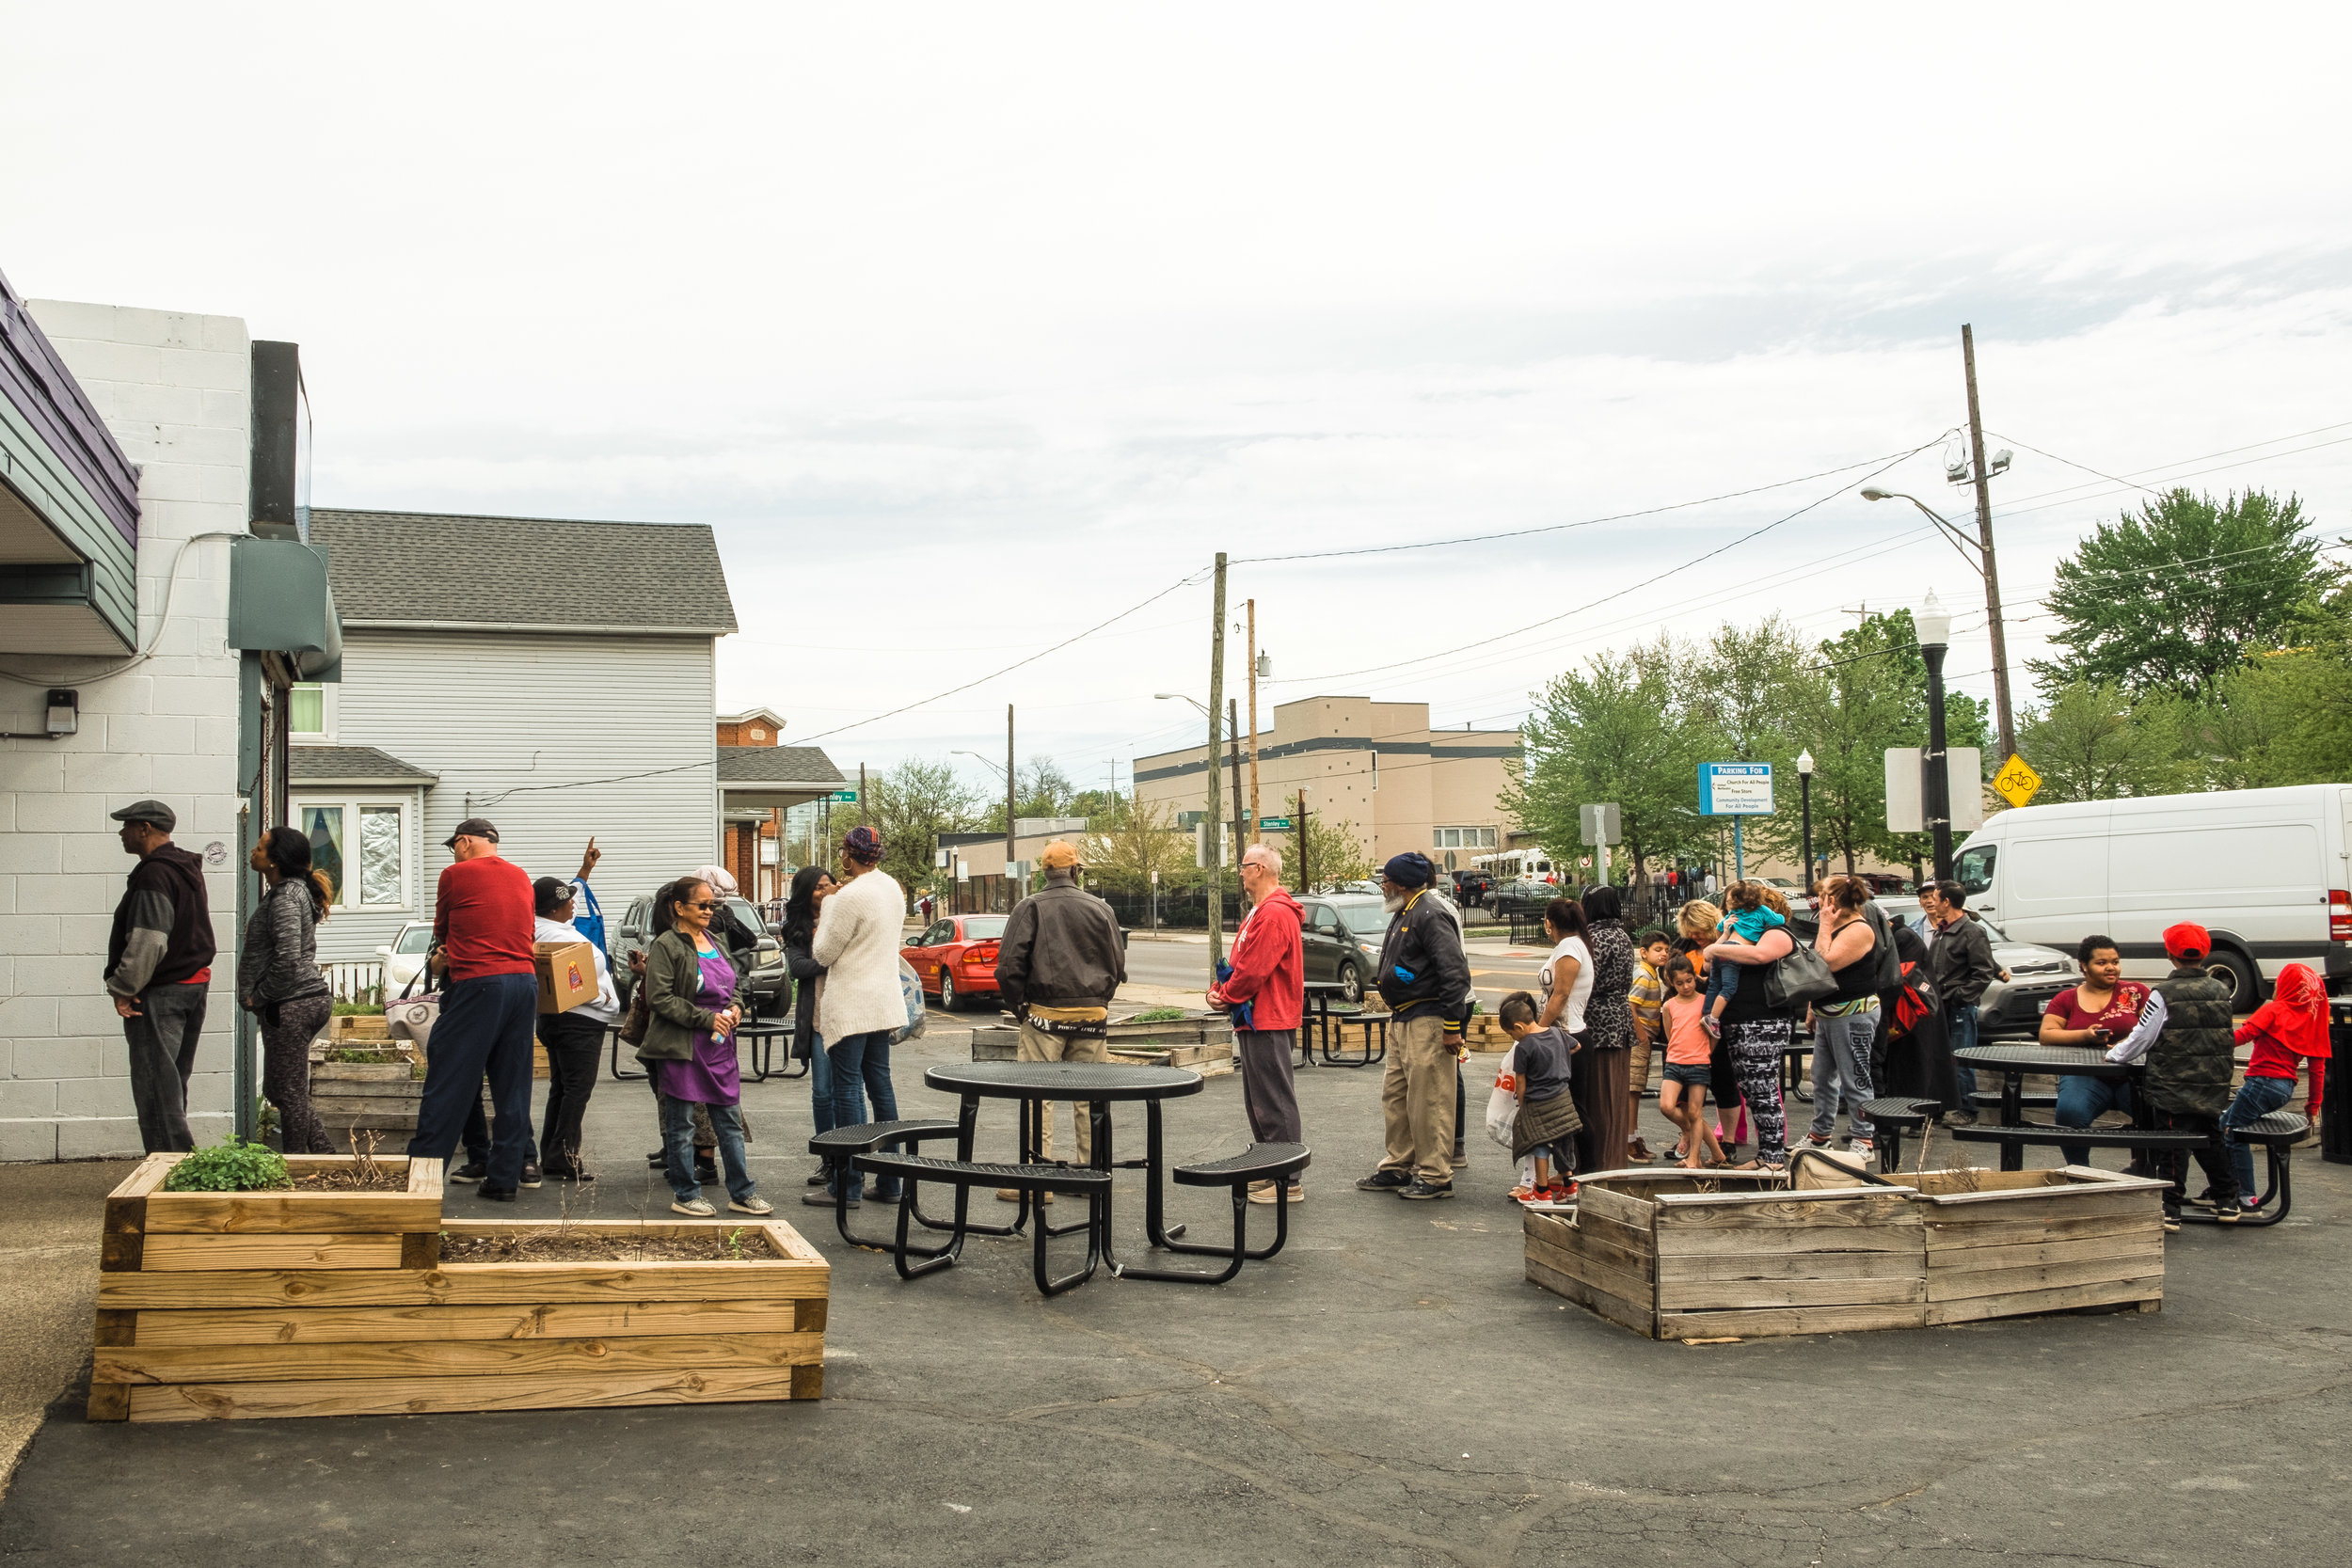  Produce is available to people with earnings up to 200 percent of the federal poverty level. The market opens its doors from 11:00am-5:00pm 5 days a week and every day the line for customers wraps around the building. 